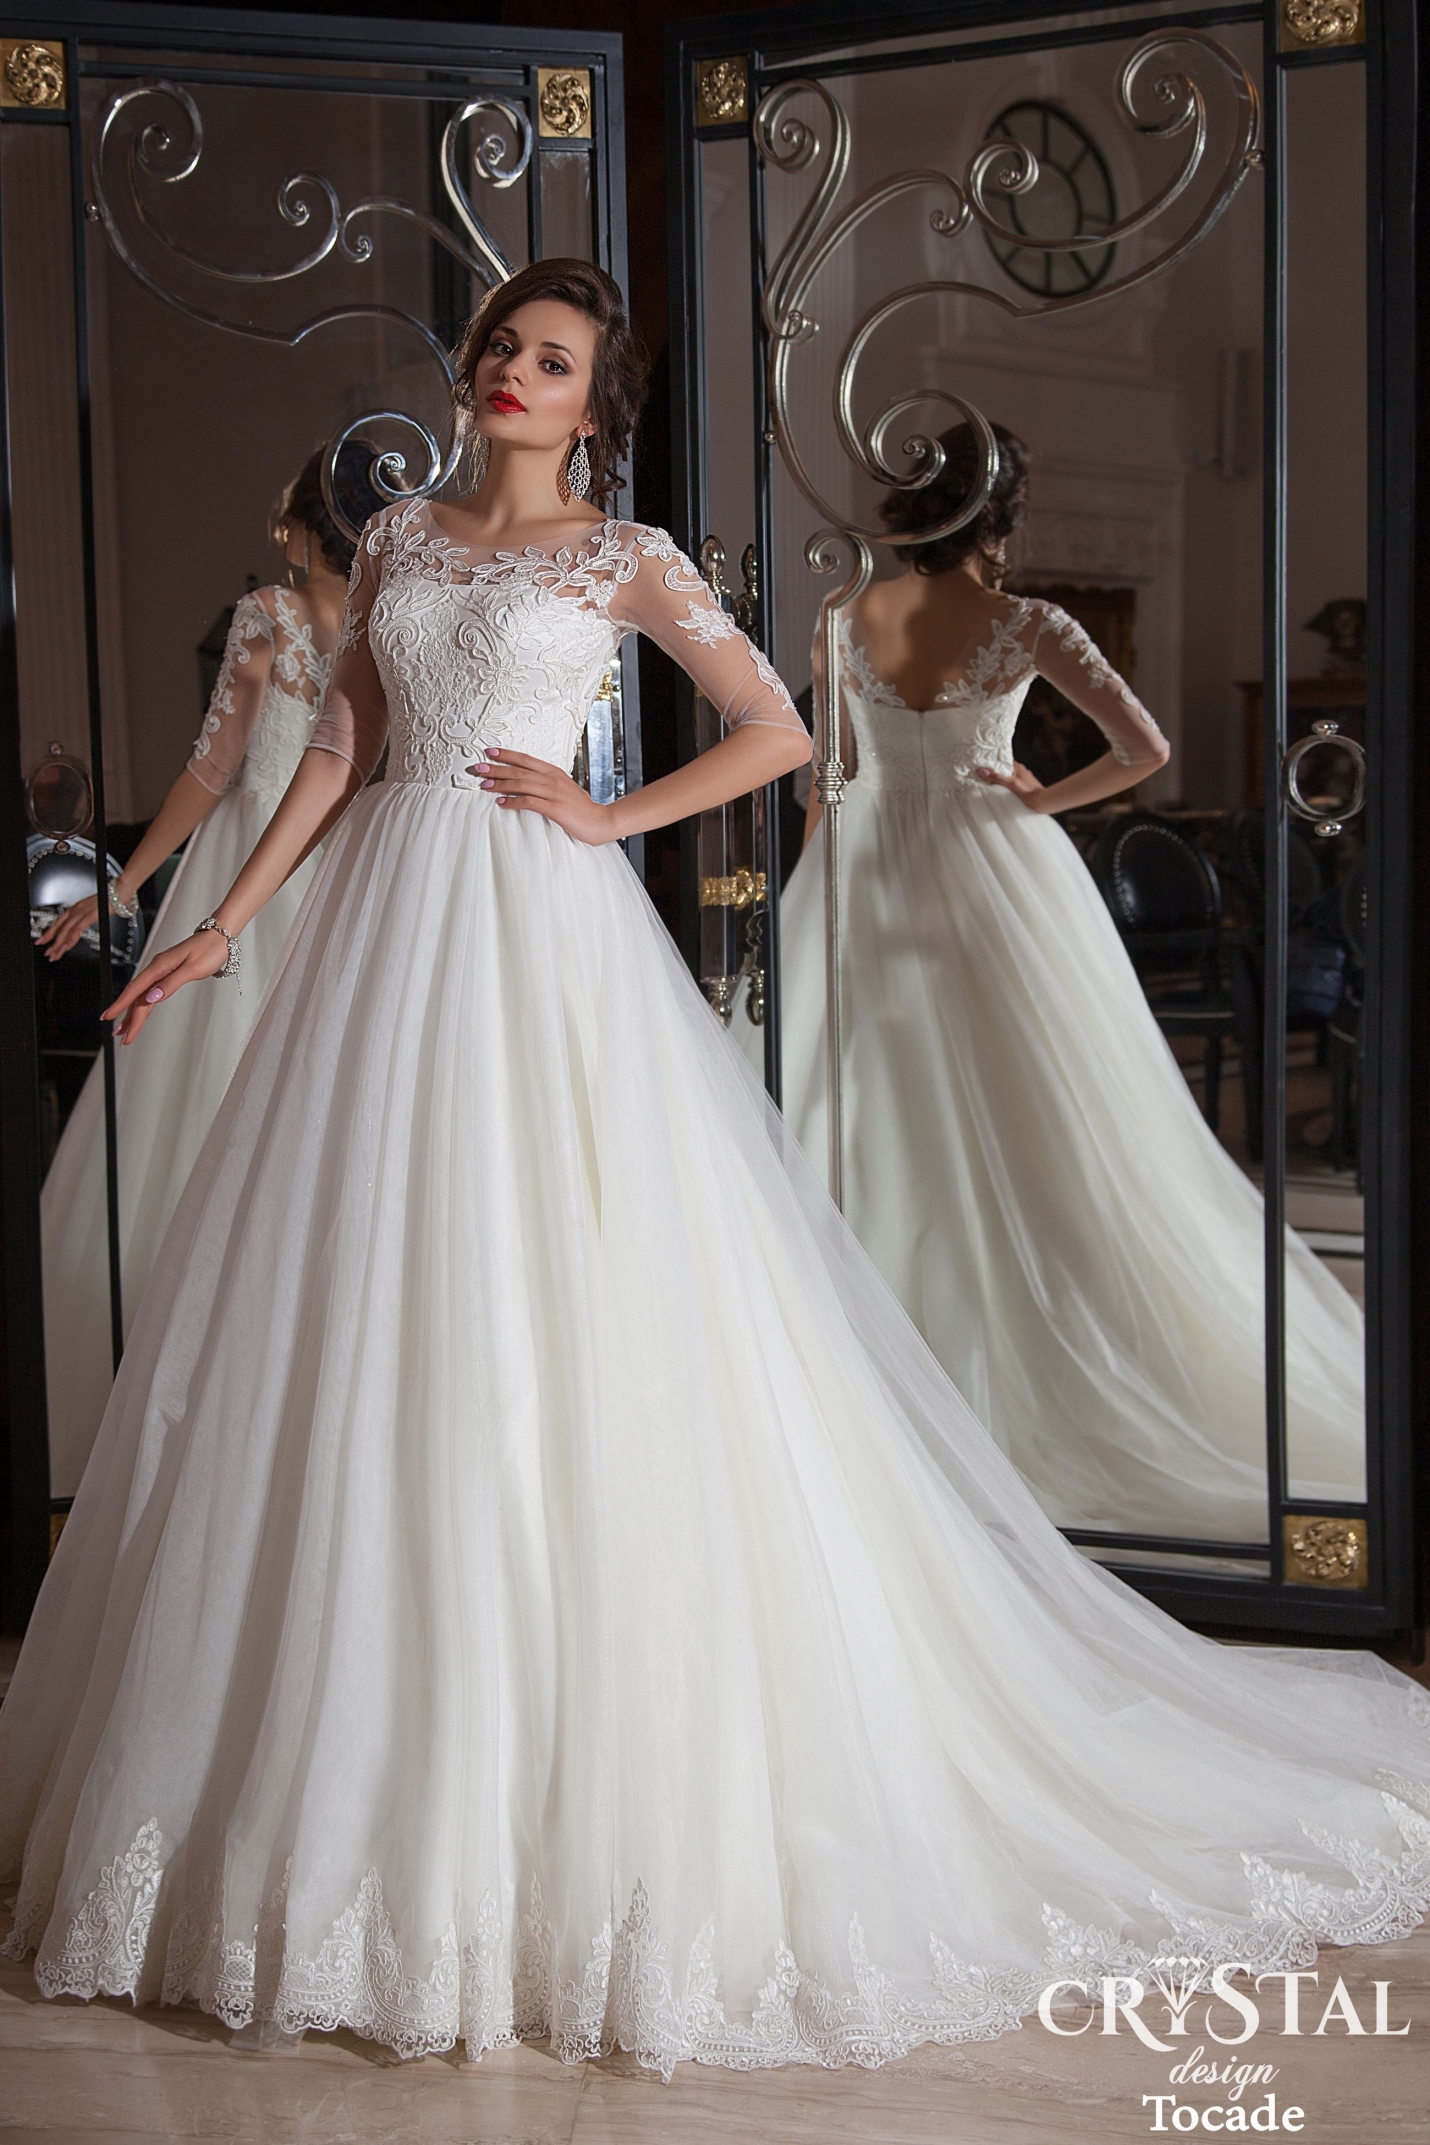 Crystal Design Wedding Collection 2015   Part 2